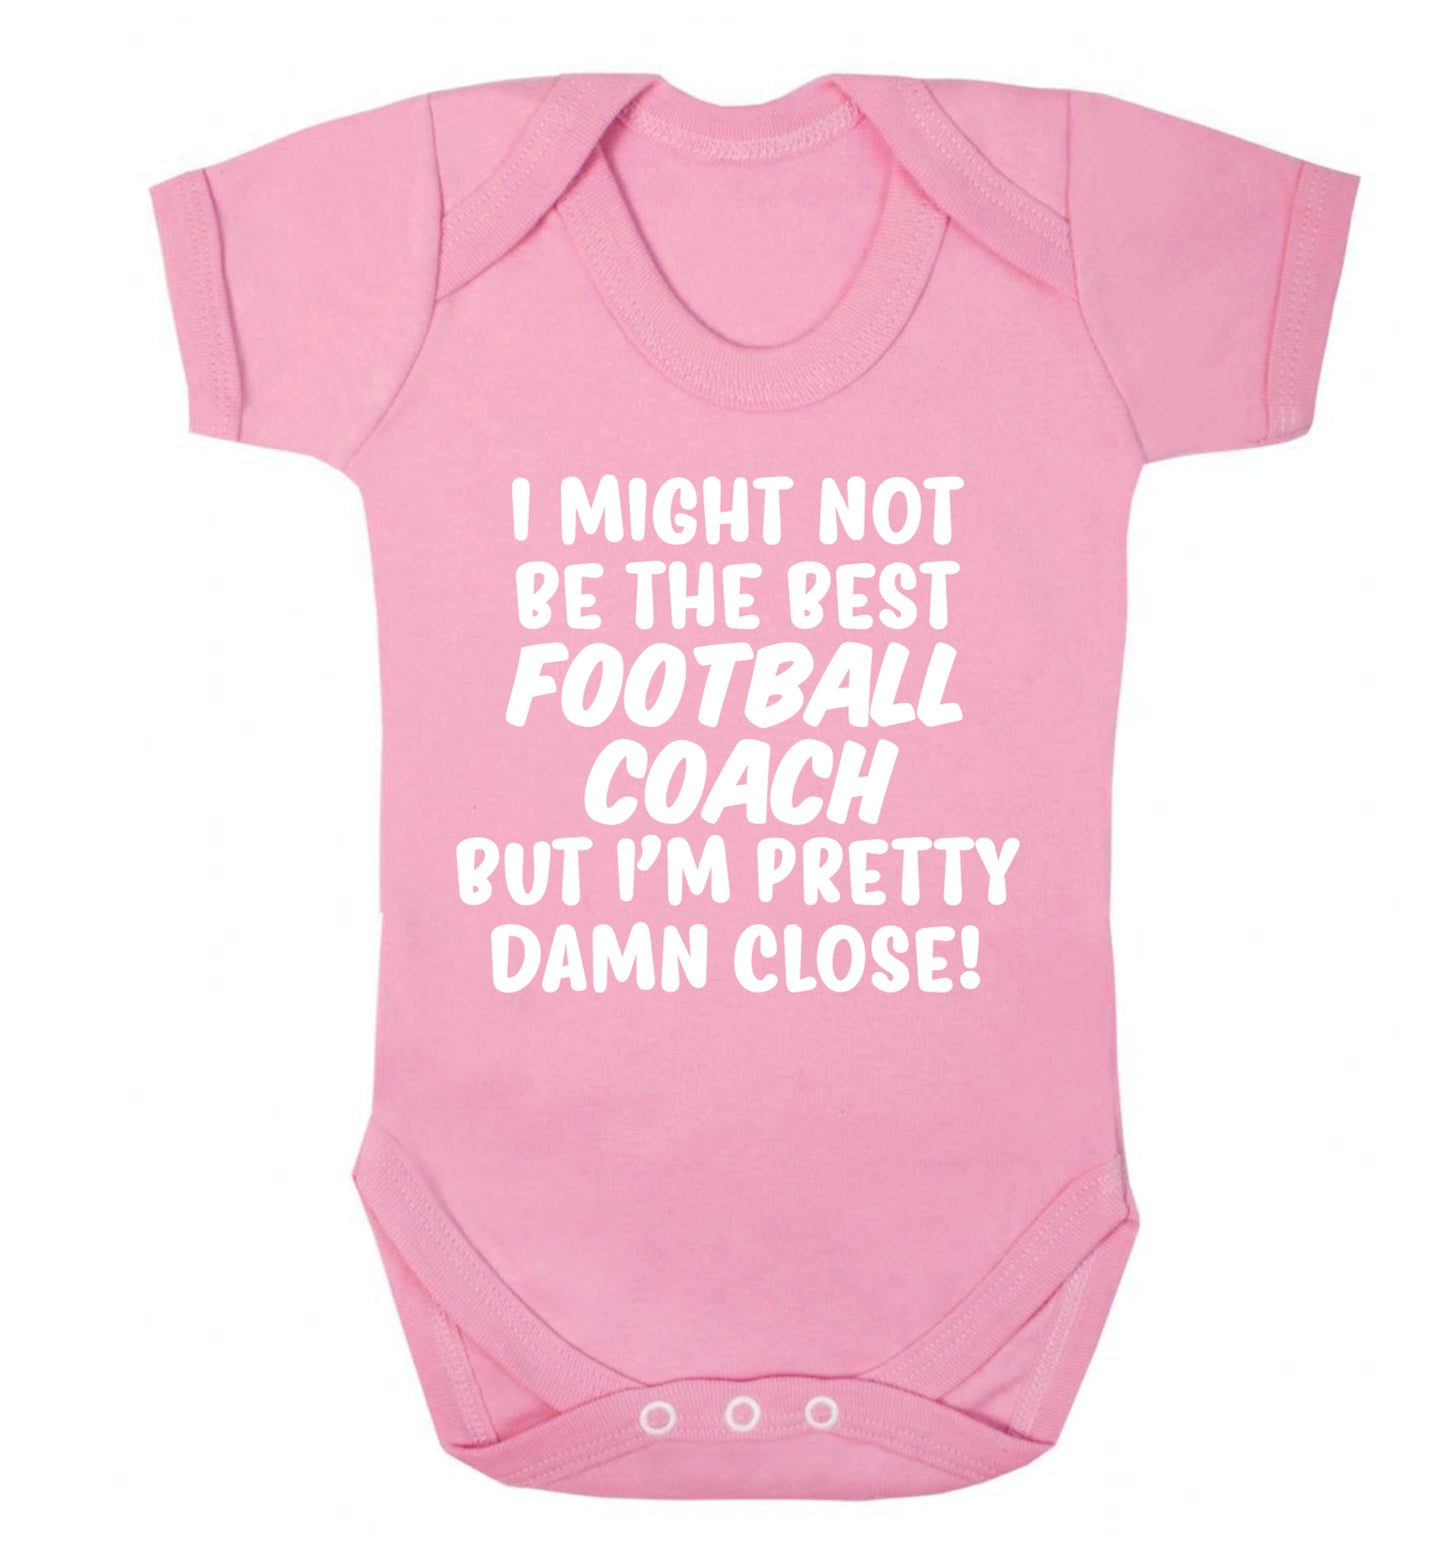 I might not be the best football coach but I'm pretty close! Baby Vest pale pink 18-24 months